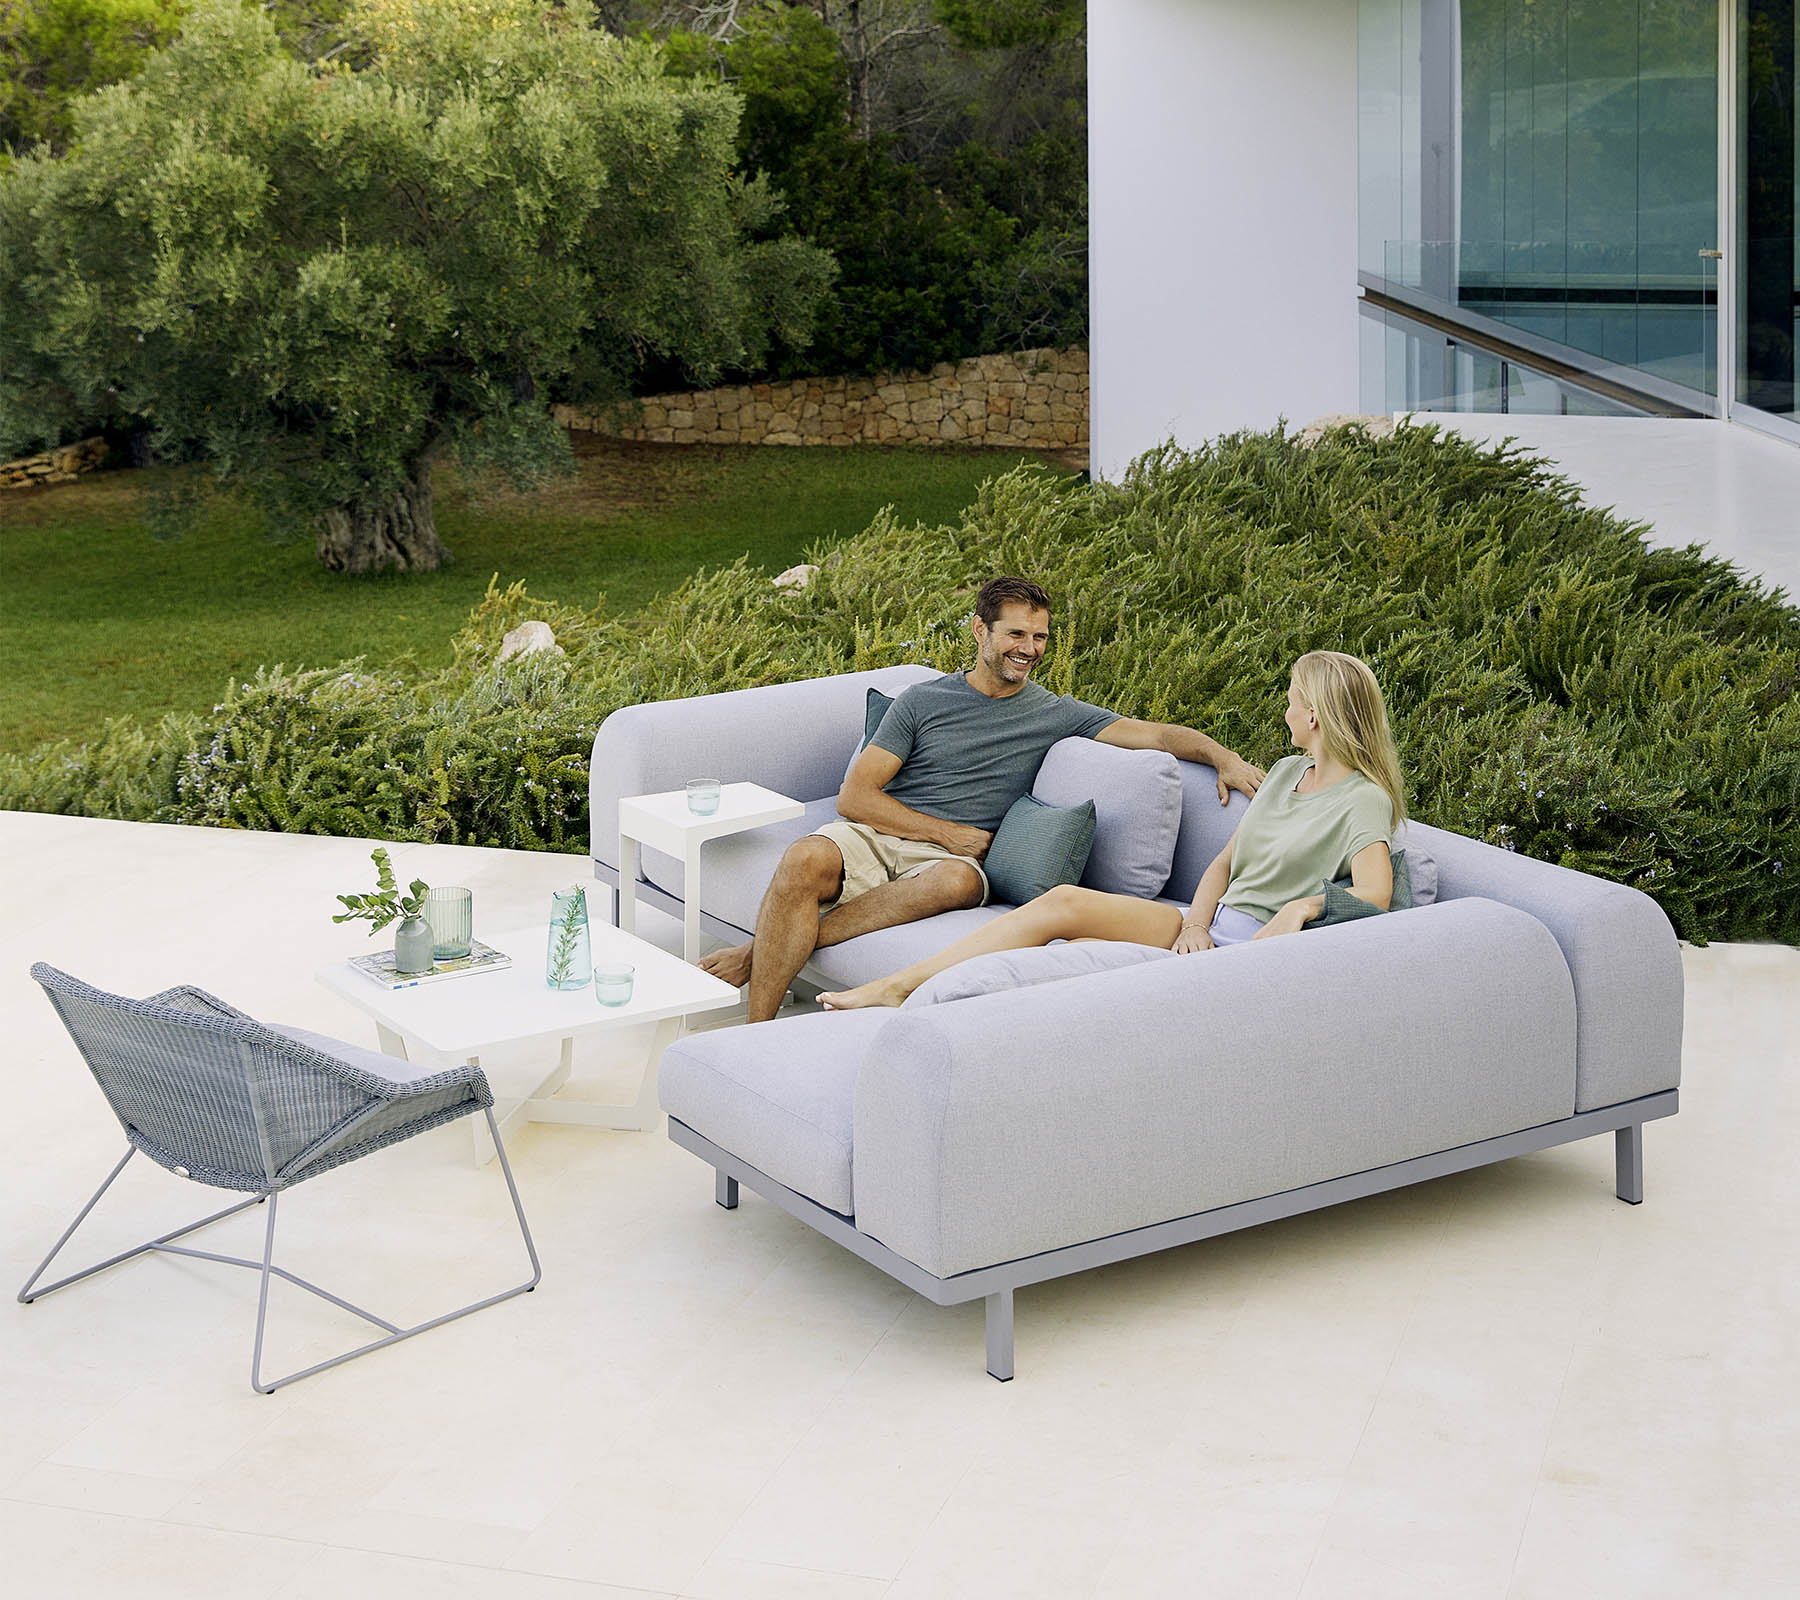 Cane-line Savannah 2-seater sofa, right module - see selection